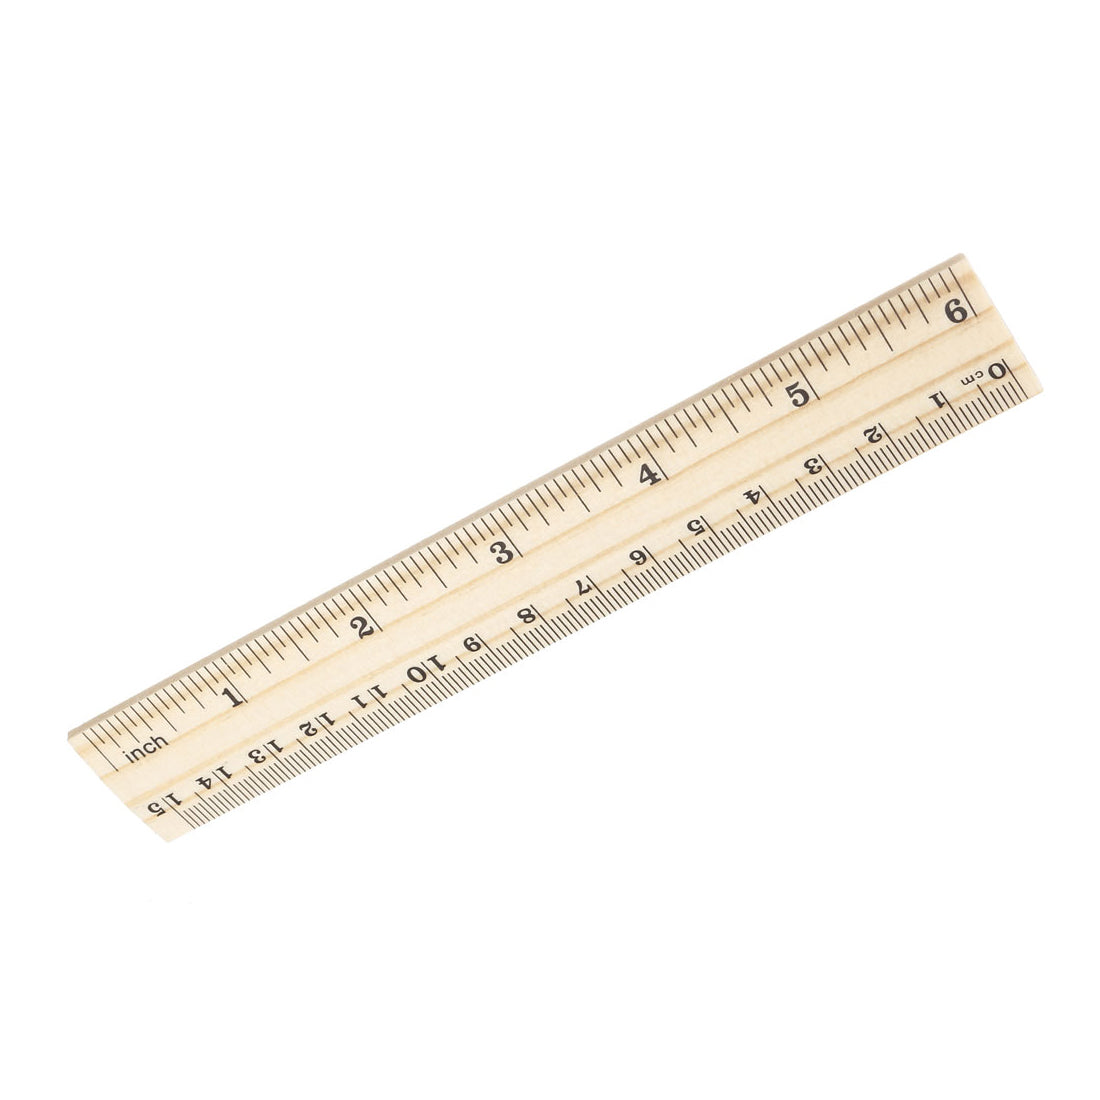 Uxcell Uxcell Wood Ruler 20cm 8 Inch 2 Scale Office Rulers Wooden Measuring Ruler 5pcs